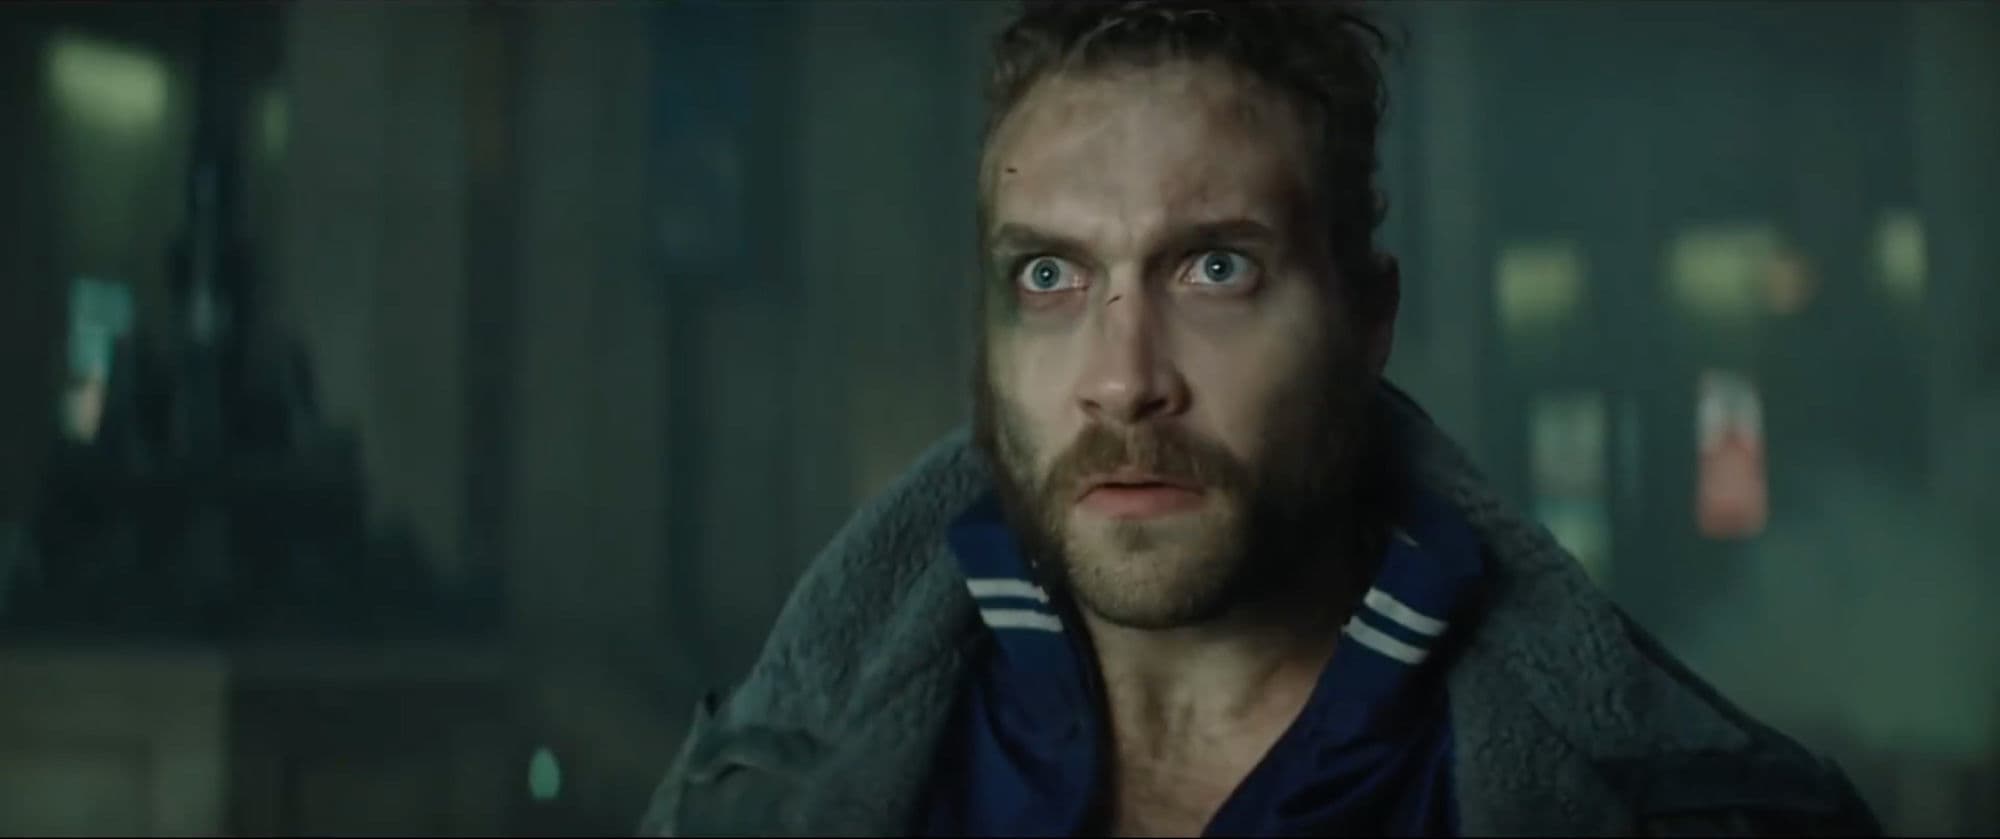 http://images-cdn.moviepilot.com/images/c_scale,h_839,w_2000/t_mp_quality/mk2ofhdtftqocwqhbzg1/suicide-squad-breakdown-who-is-captain-boomerang-892963.jpg